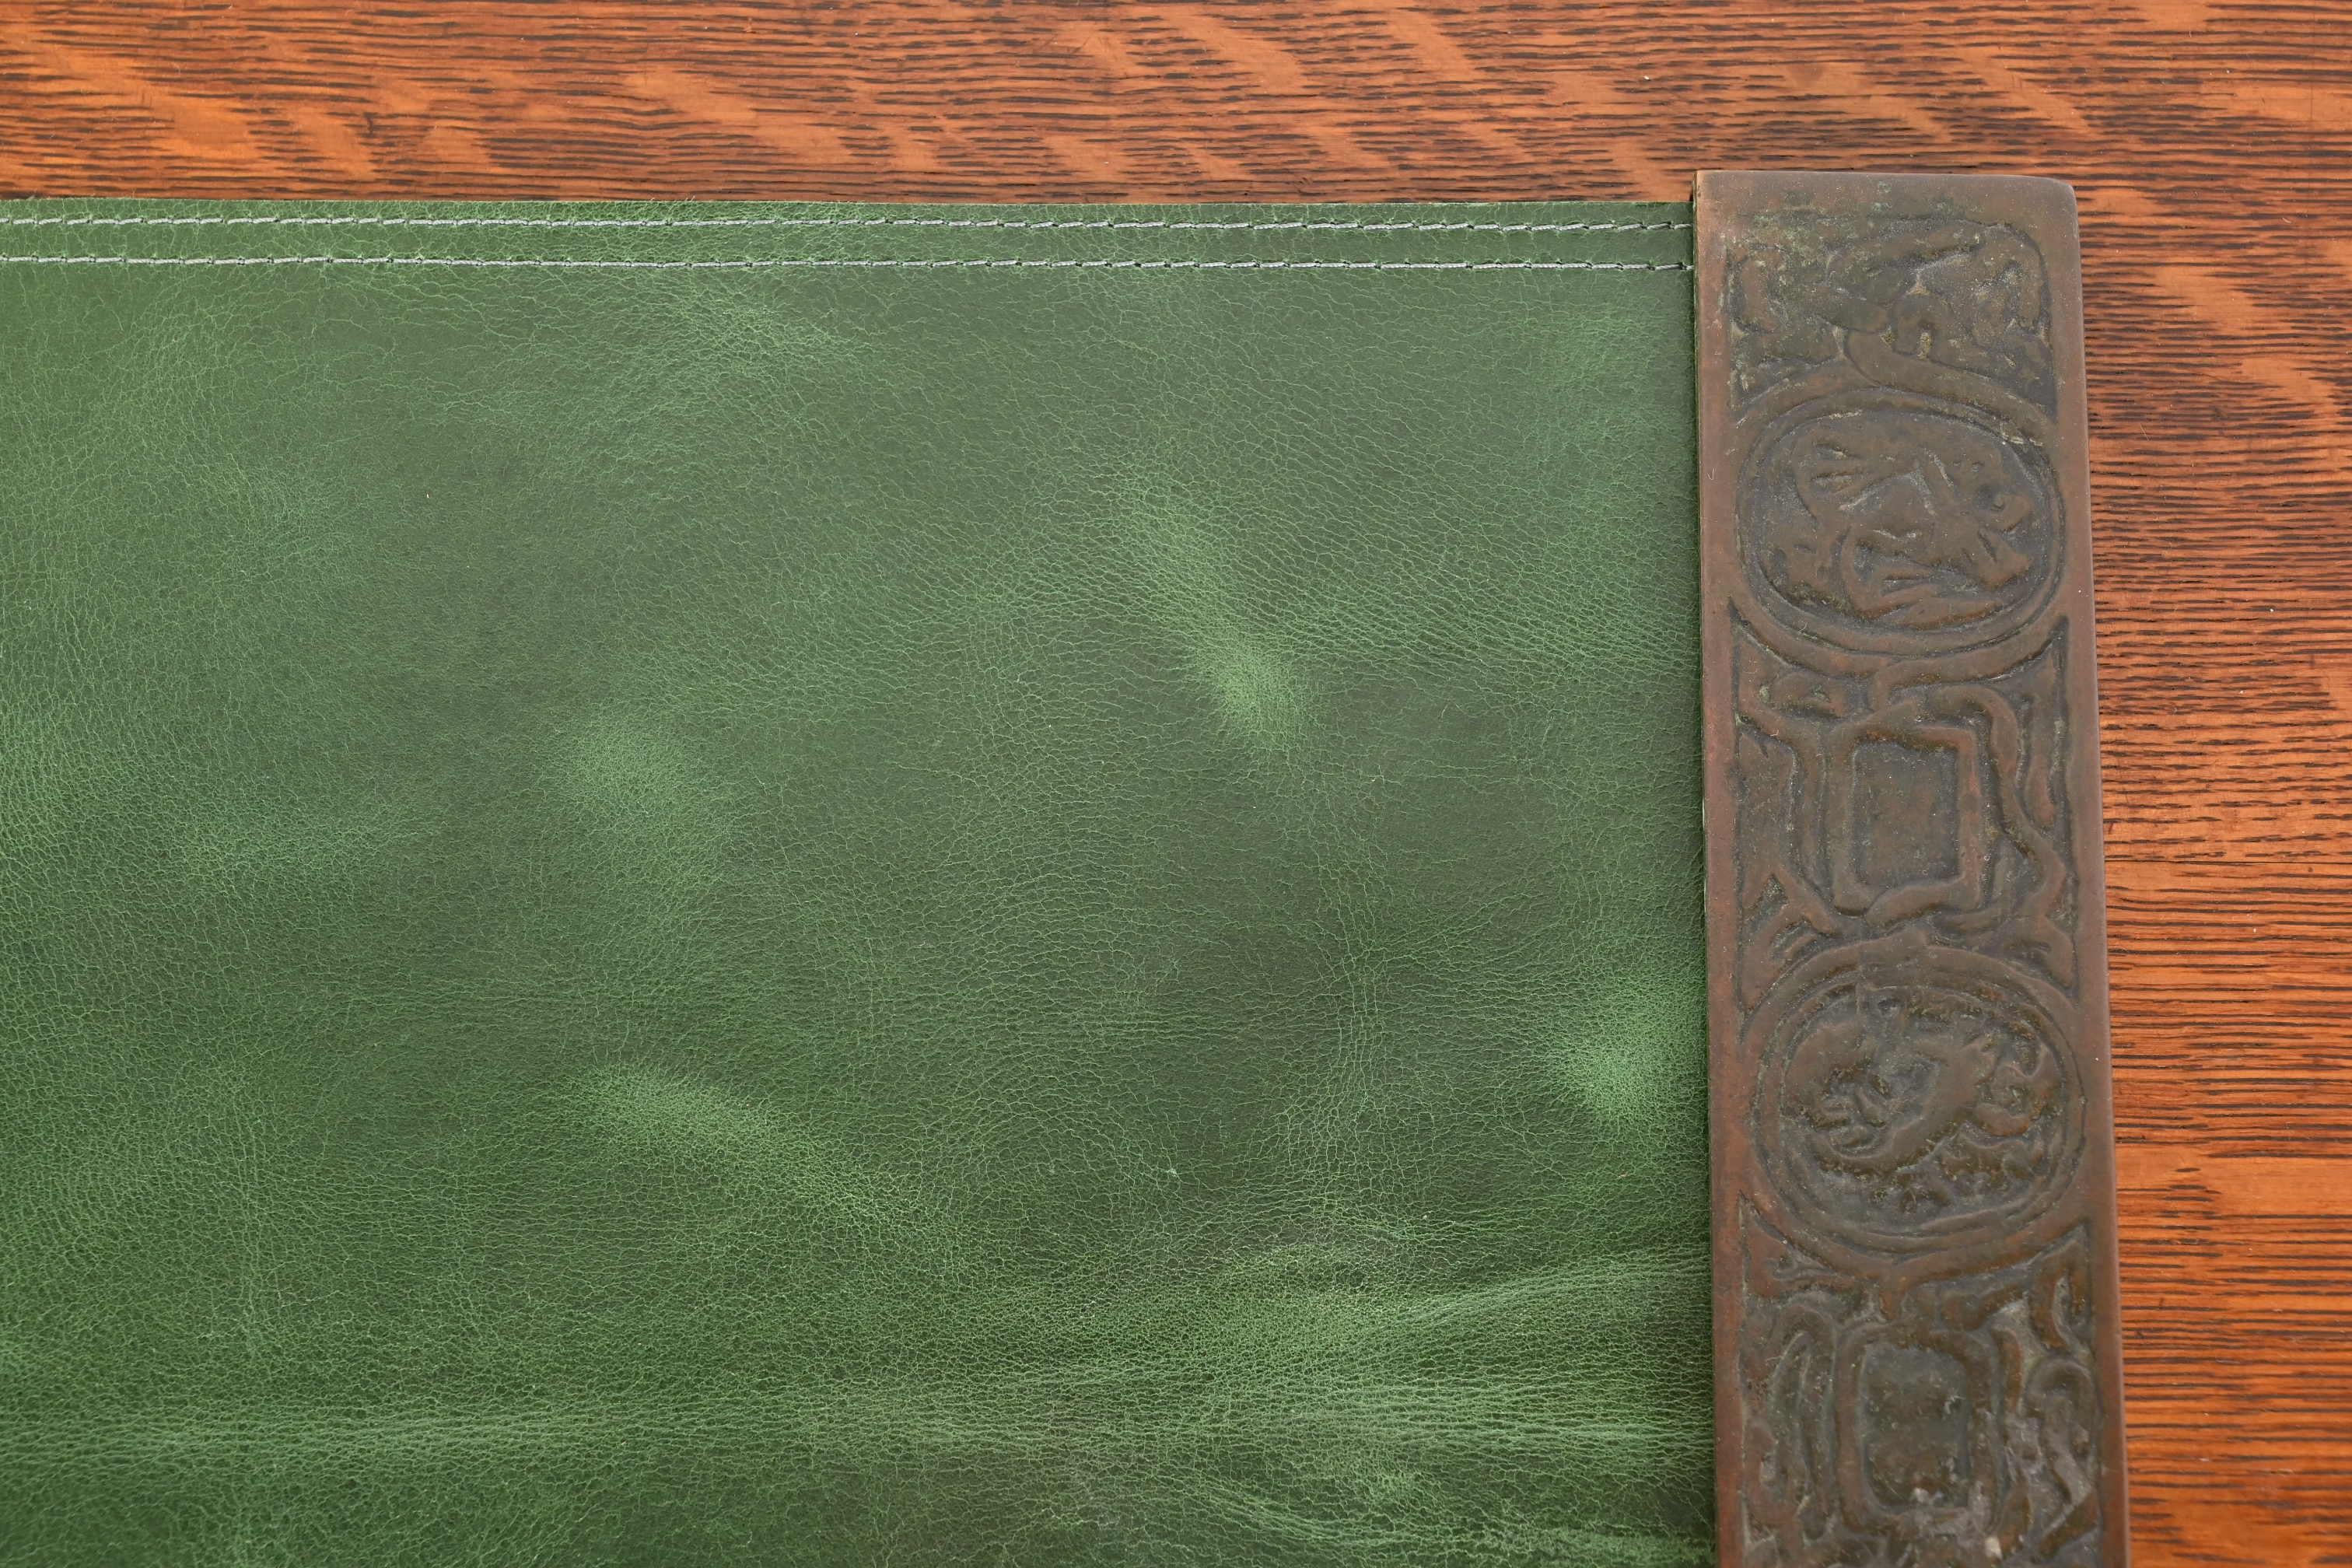 Tiffany Studios New York Zodiac Bronze Blotter Ends With Green Leather Desk Pad For Sale 2